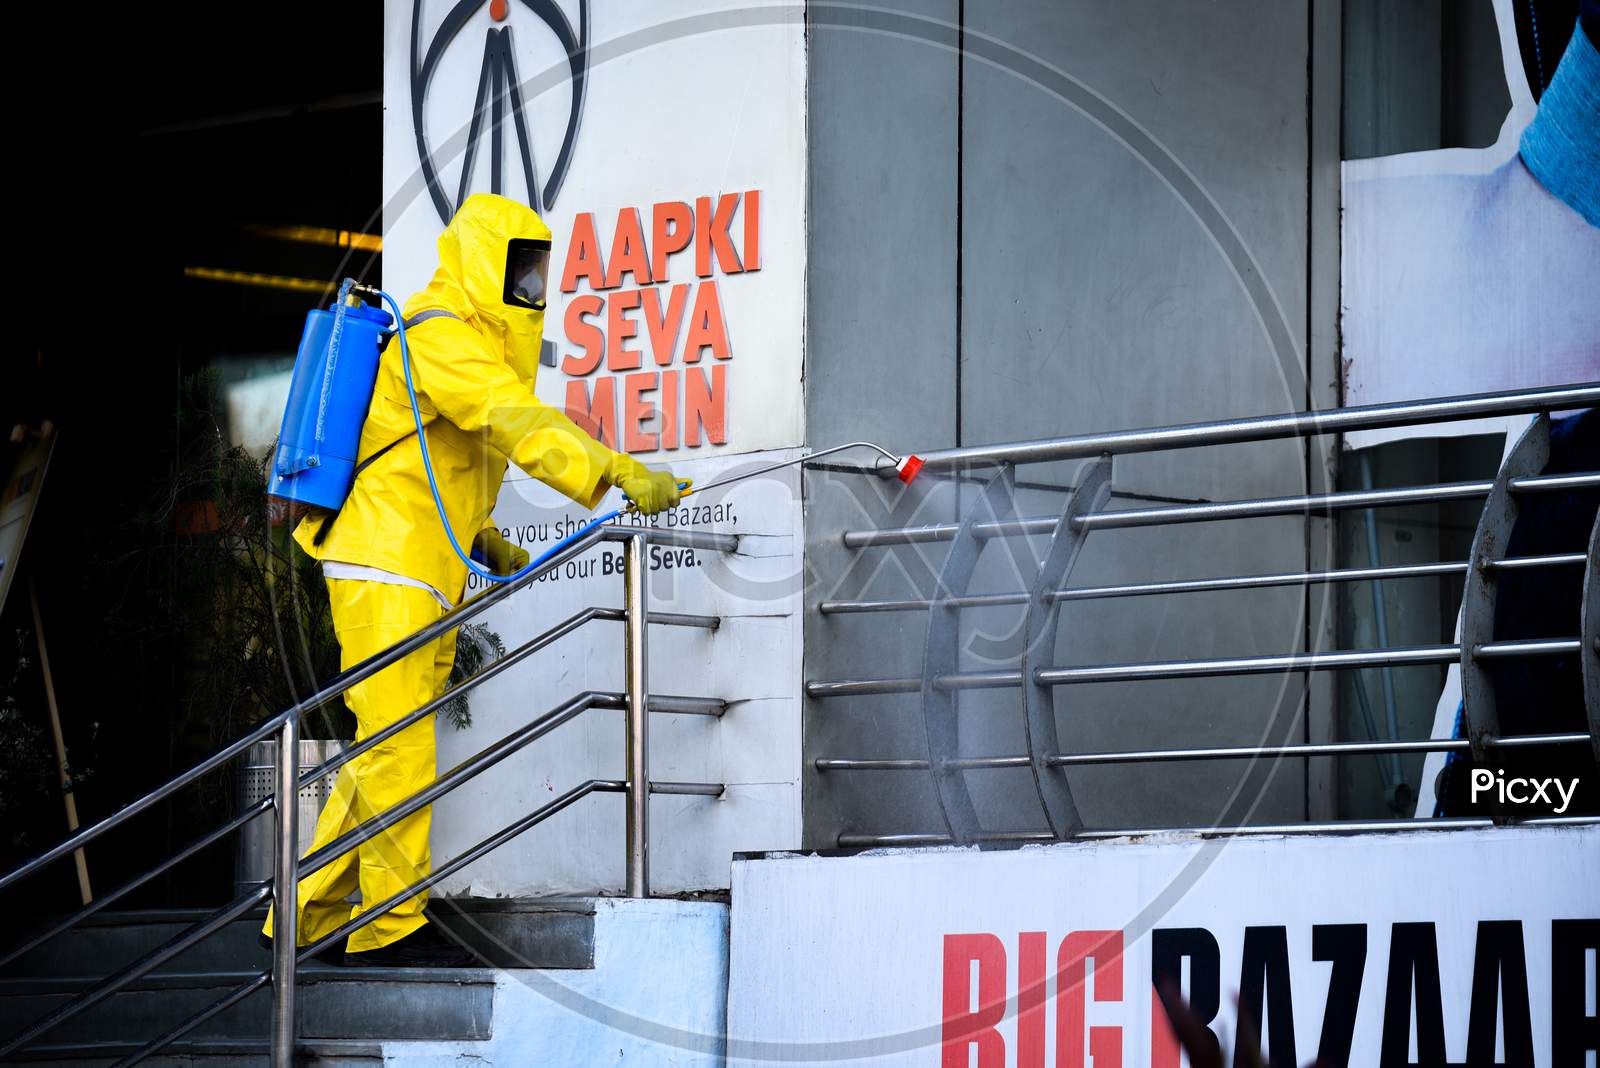 Disaster Response Force(DRF) team with full body suits spraying Disinfectant Solution across the Hyderabad City to reduce the spread of the COVID-19 Virus or Coronavirus